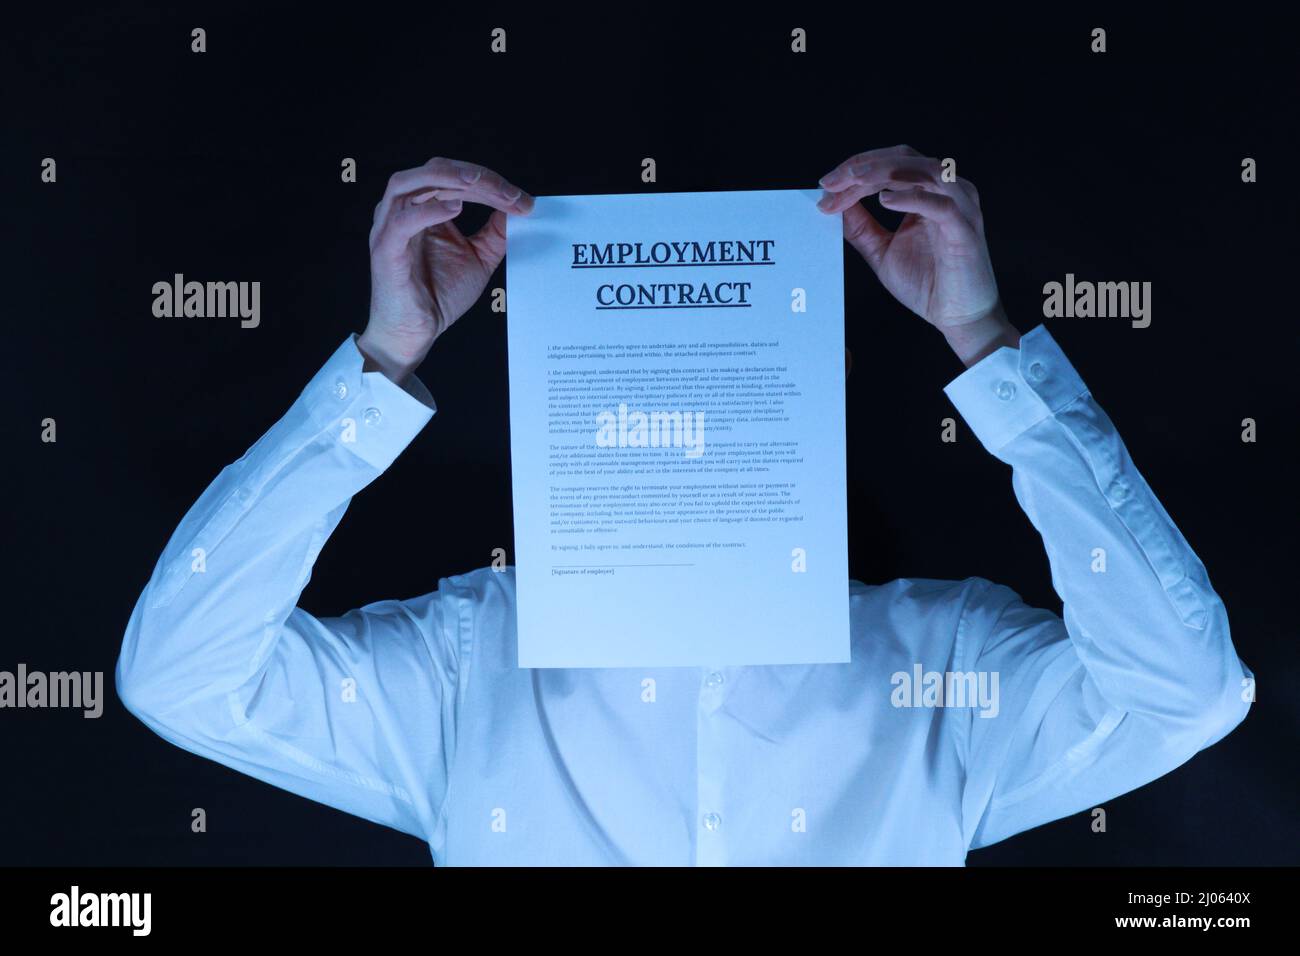 The Faceless Employee - A man in a white shirt standing against a black background holds an employee contract over his face Stock Photo